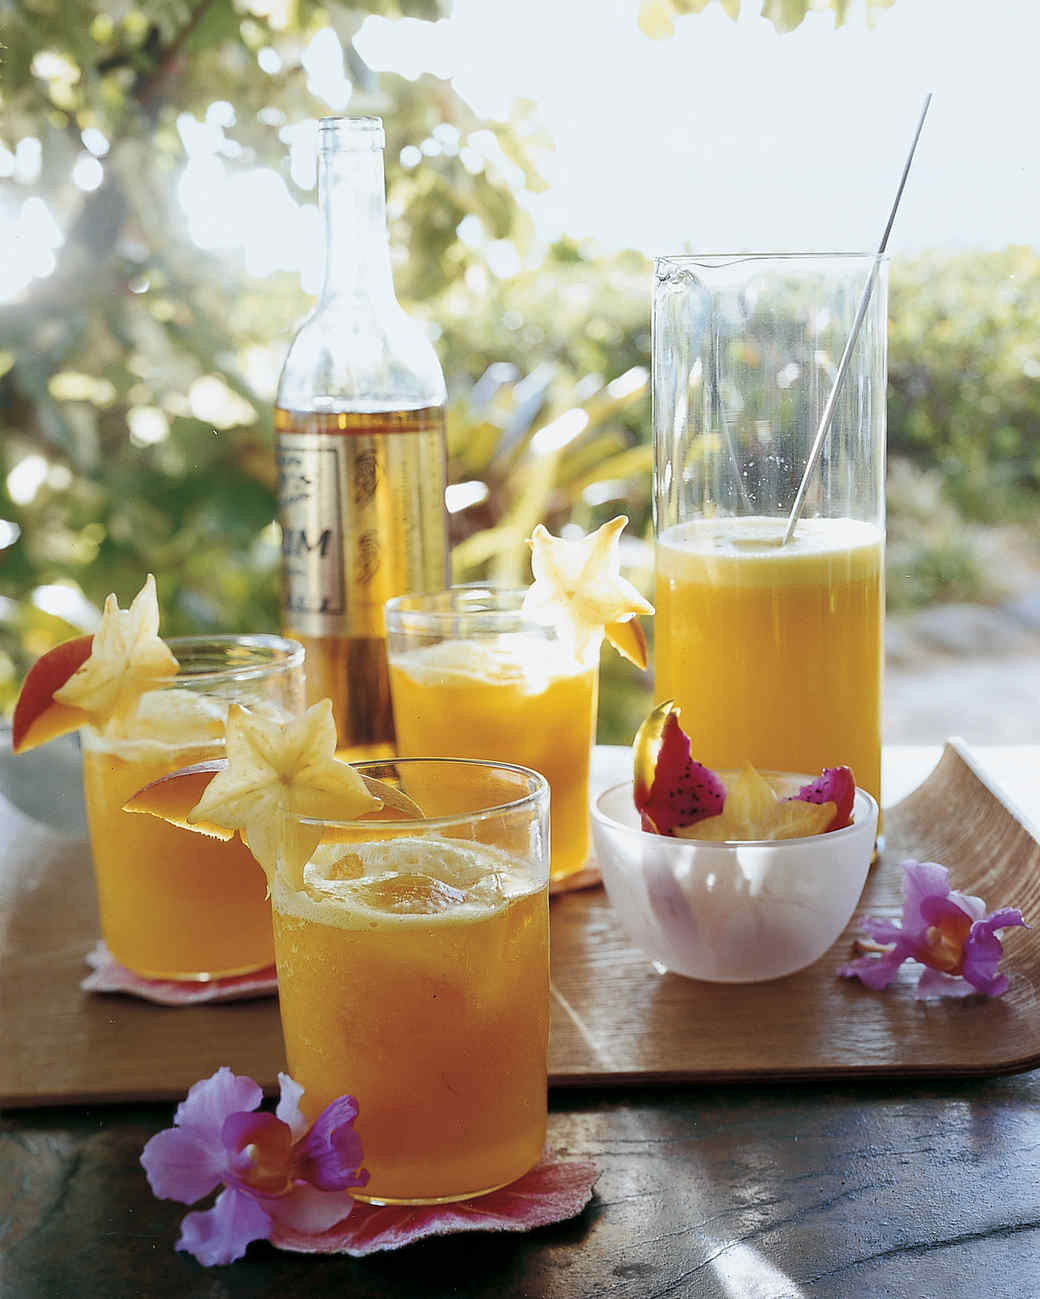 Rum And Pineapple Juice Drinks
 Pineapple and Mango Rum Cocktails Recipe